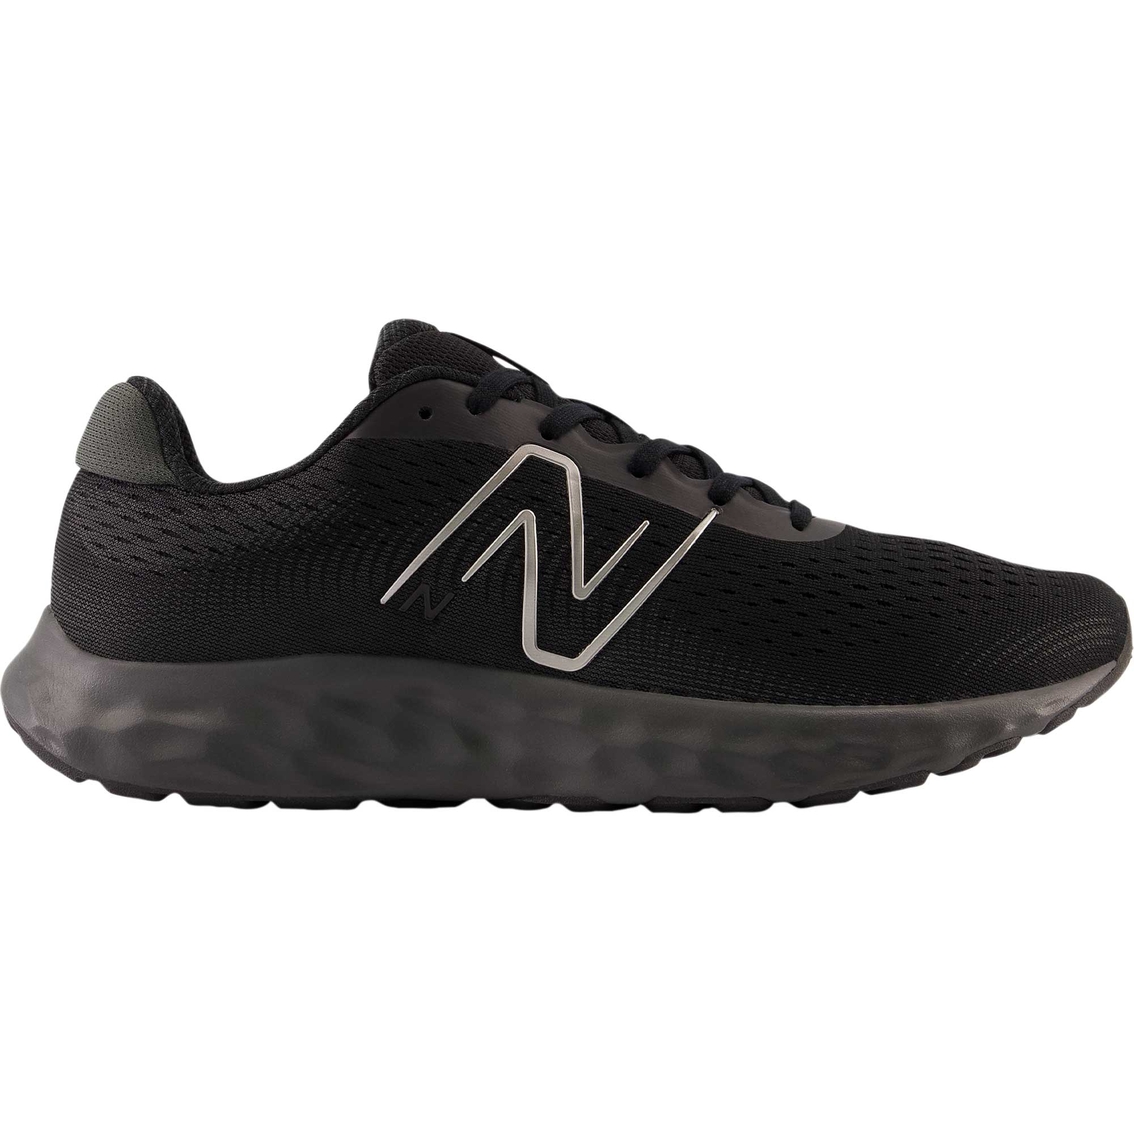 New Balance 520v8 Running Shoes | Men's Athletic Shoes | Shoes | Shop ...